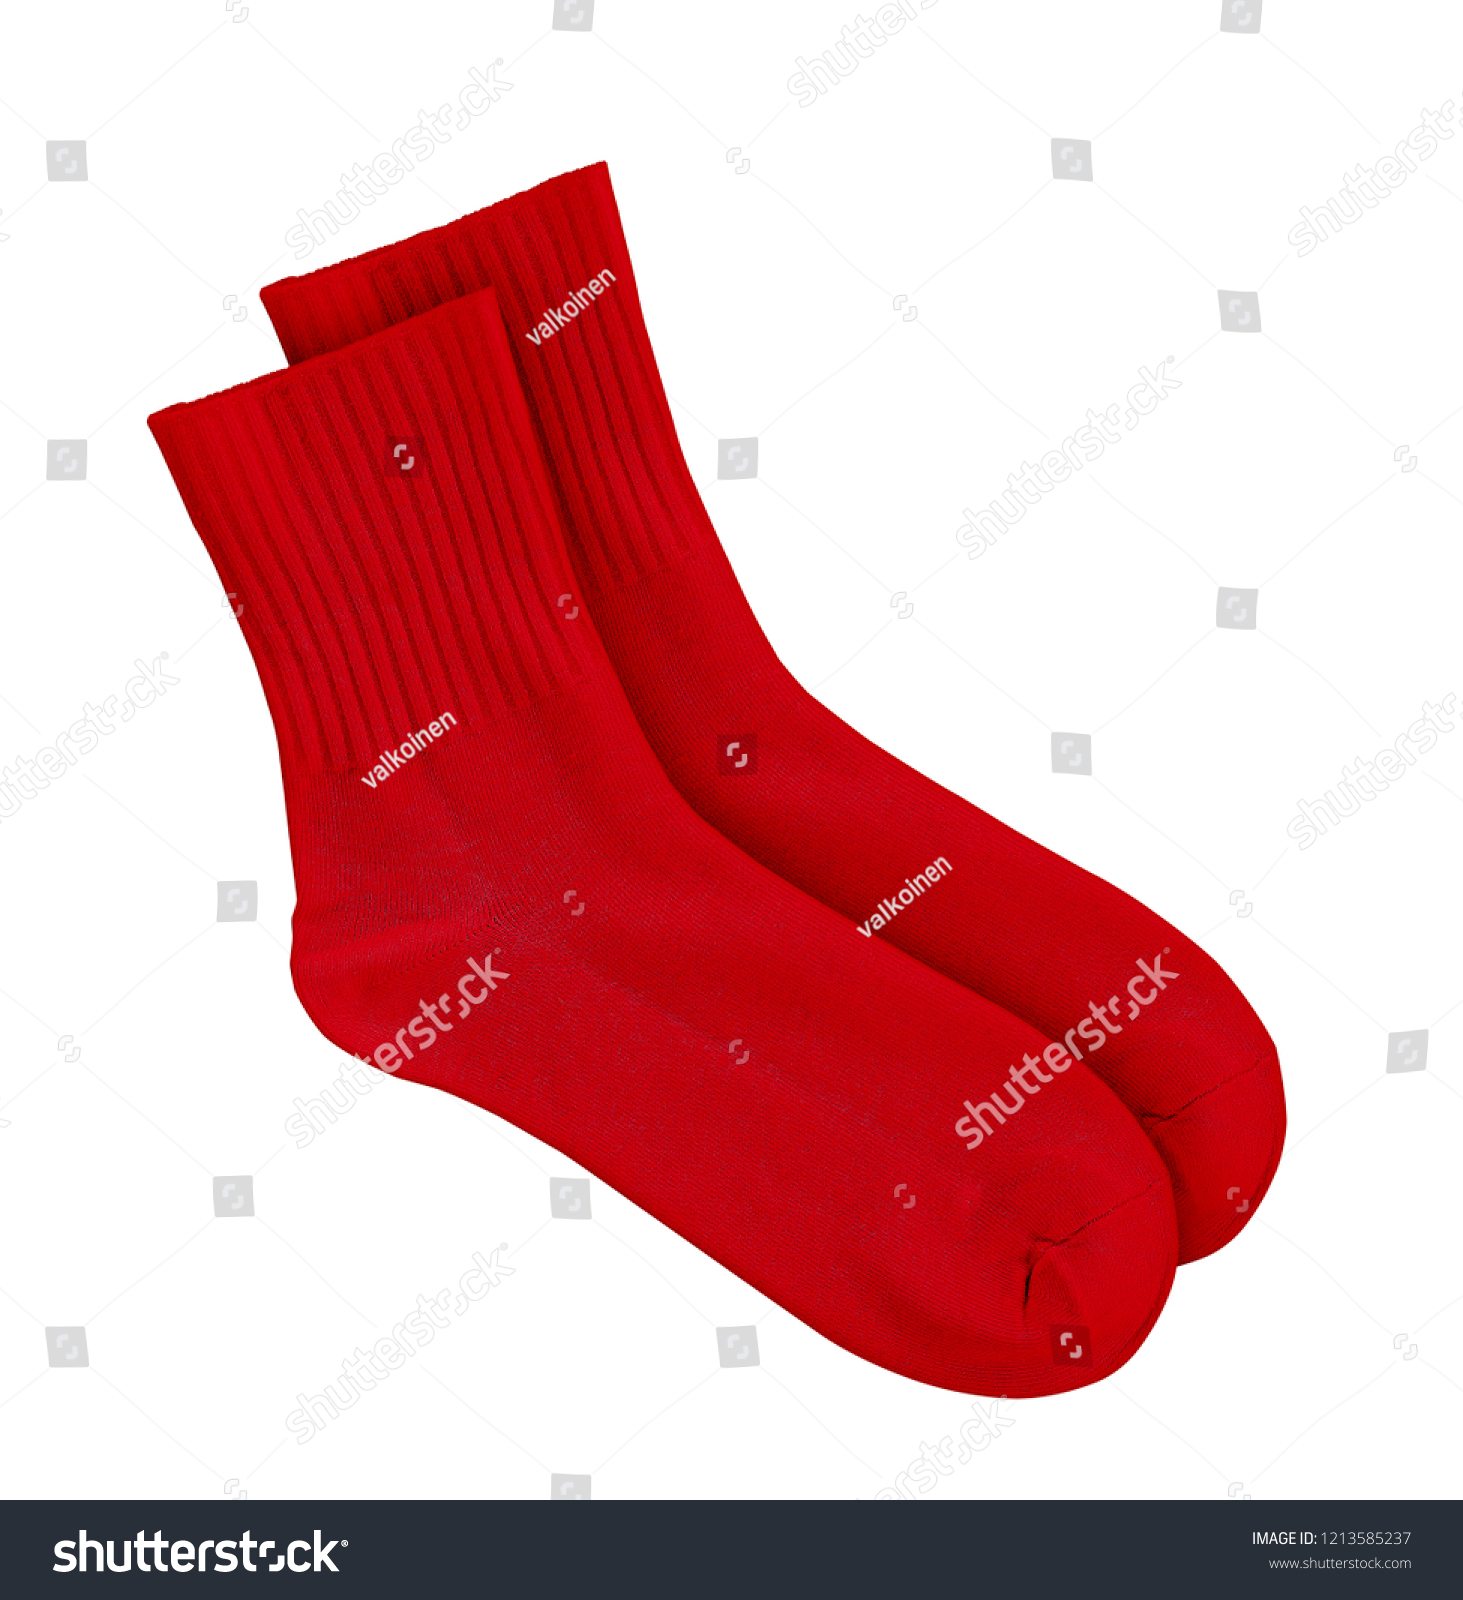 70,657 Red socks Stock Photos, Images & Photography | Shutterstock